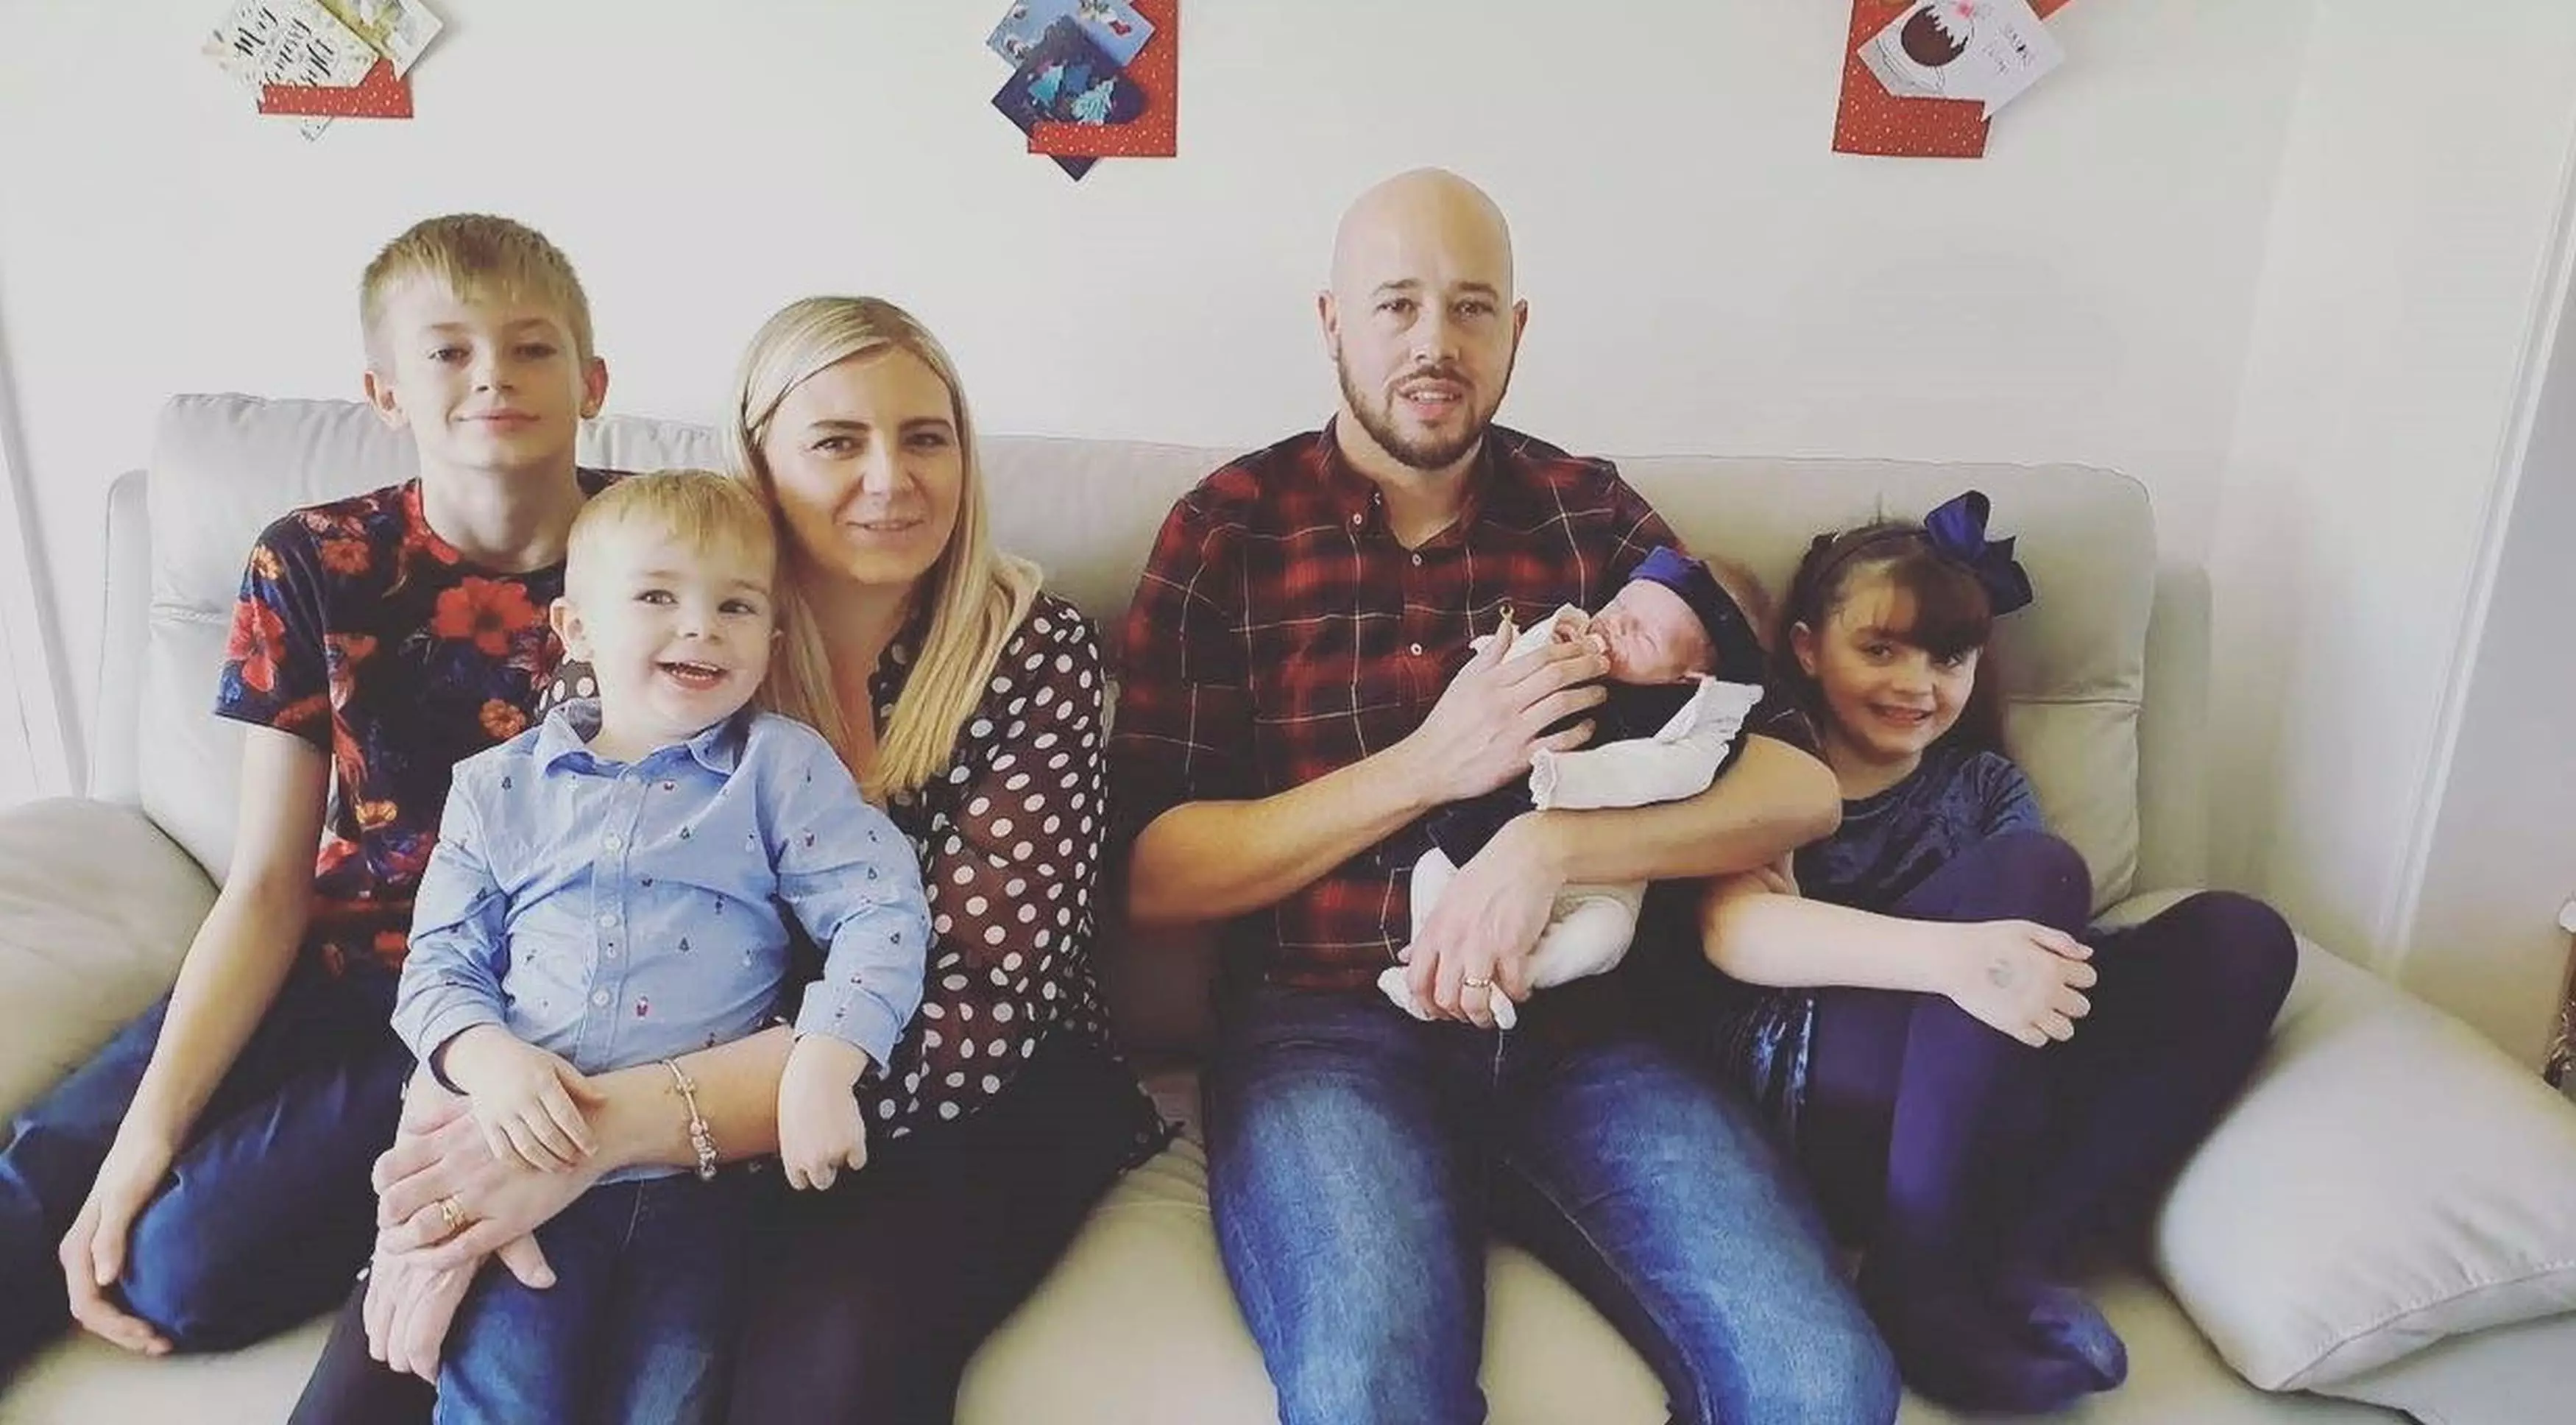 Grace Meachim, 32, and James Meachim, 34, were adamant they would only have three children until Sienna arrived (